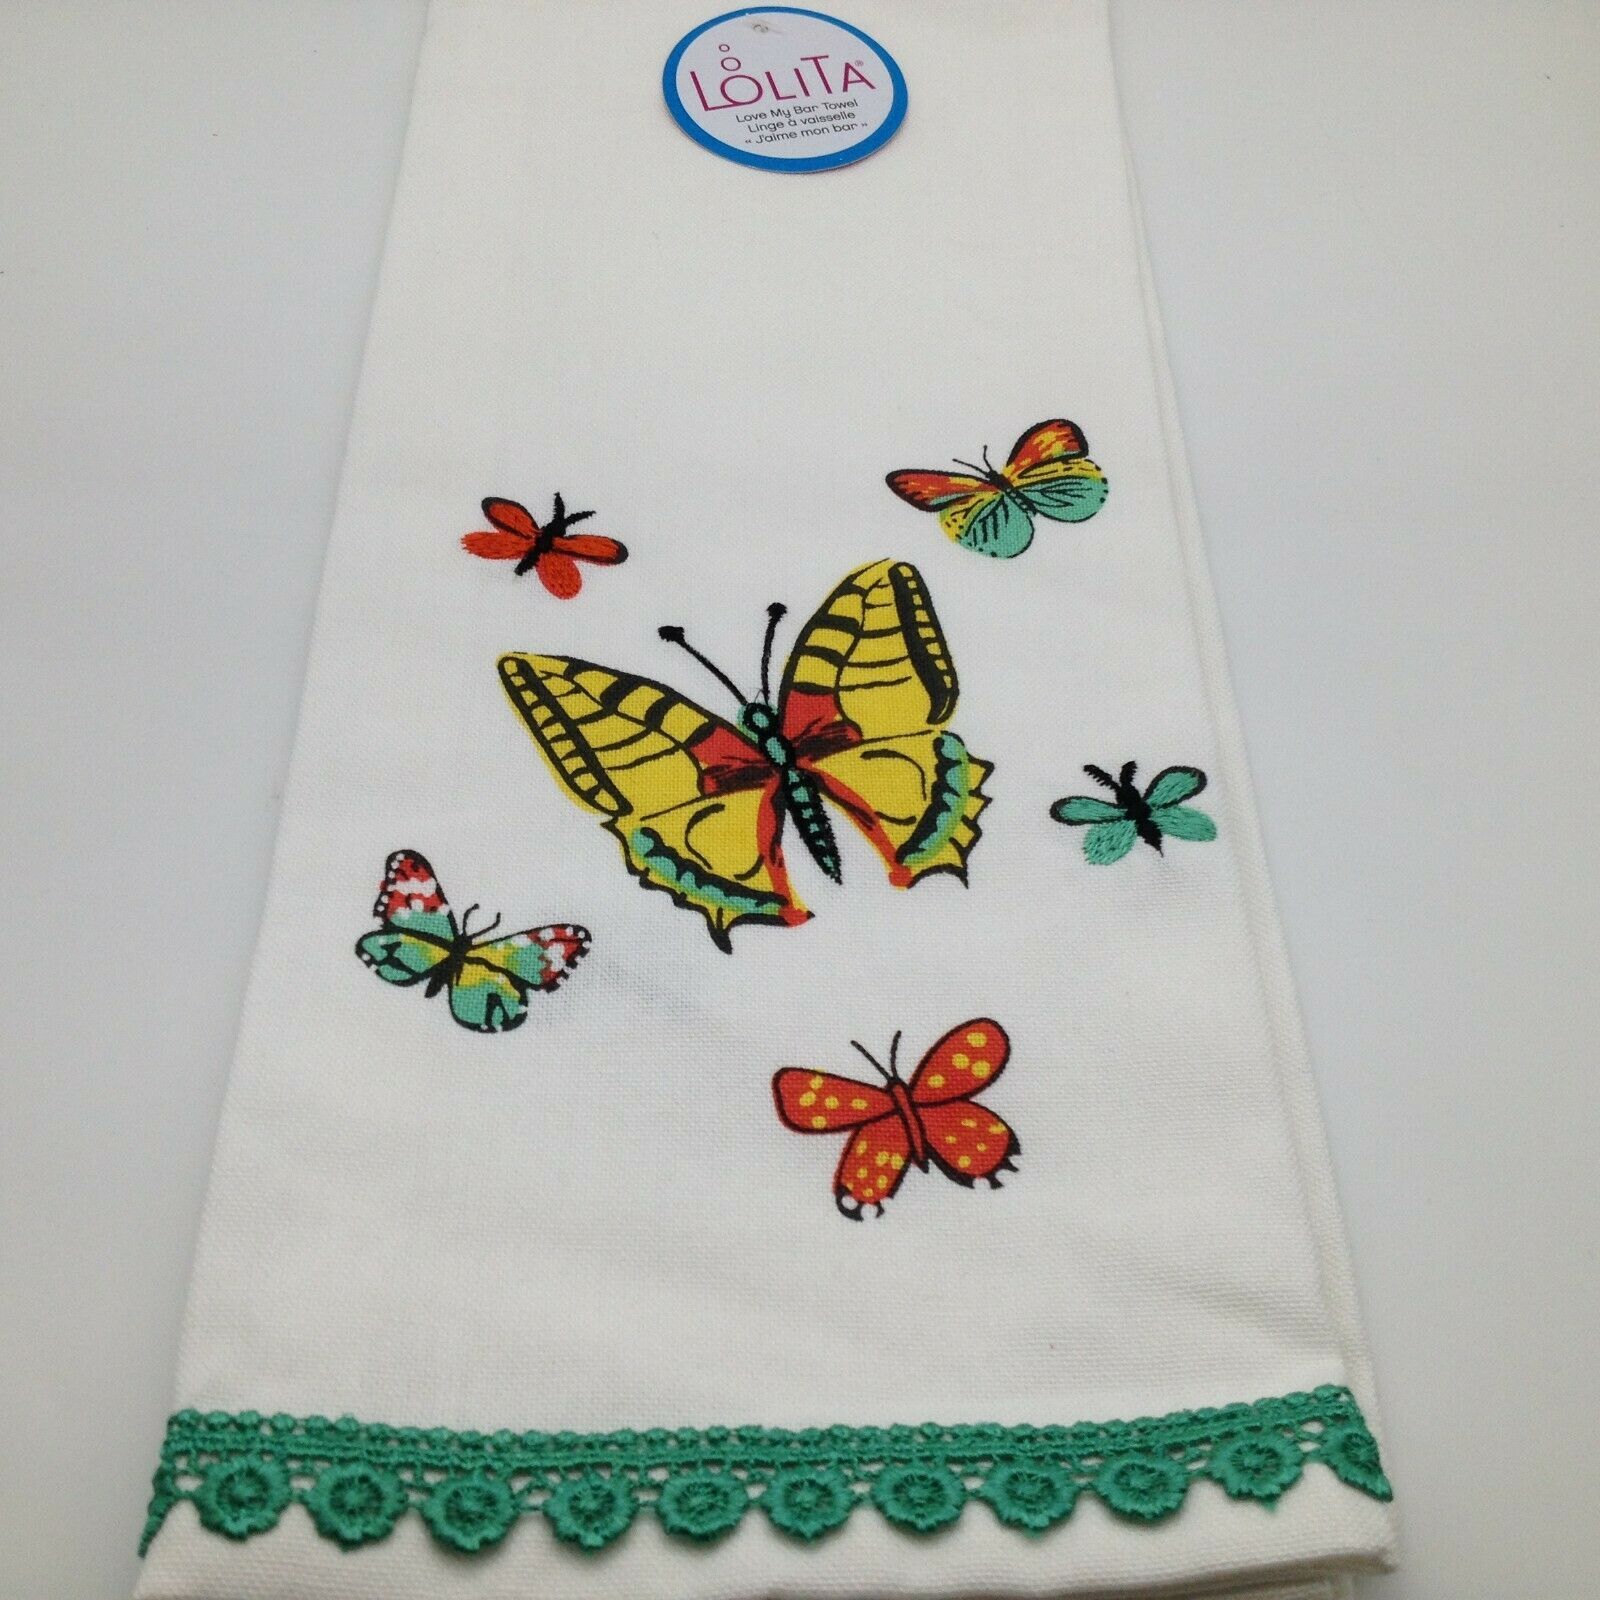 Lolita BUTTERFLY Bar - Kitchen Towel Embroidered 100 Percent Cotton 26x16